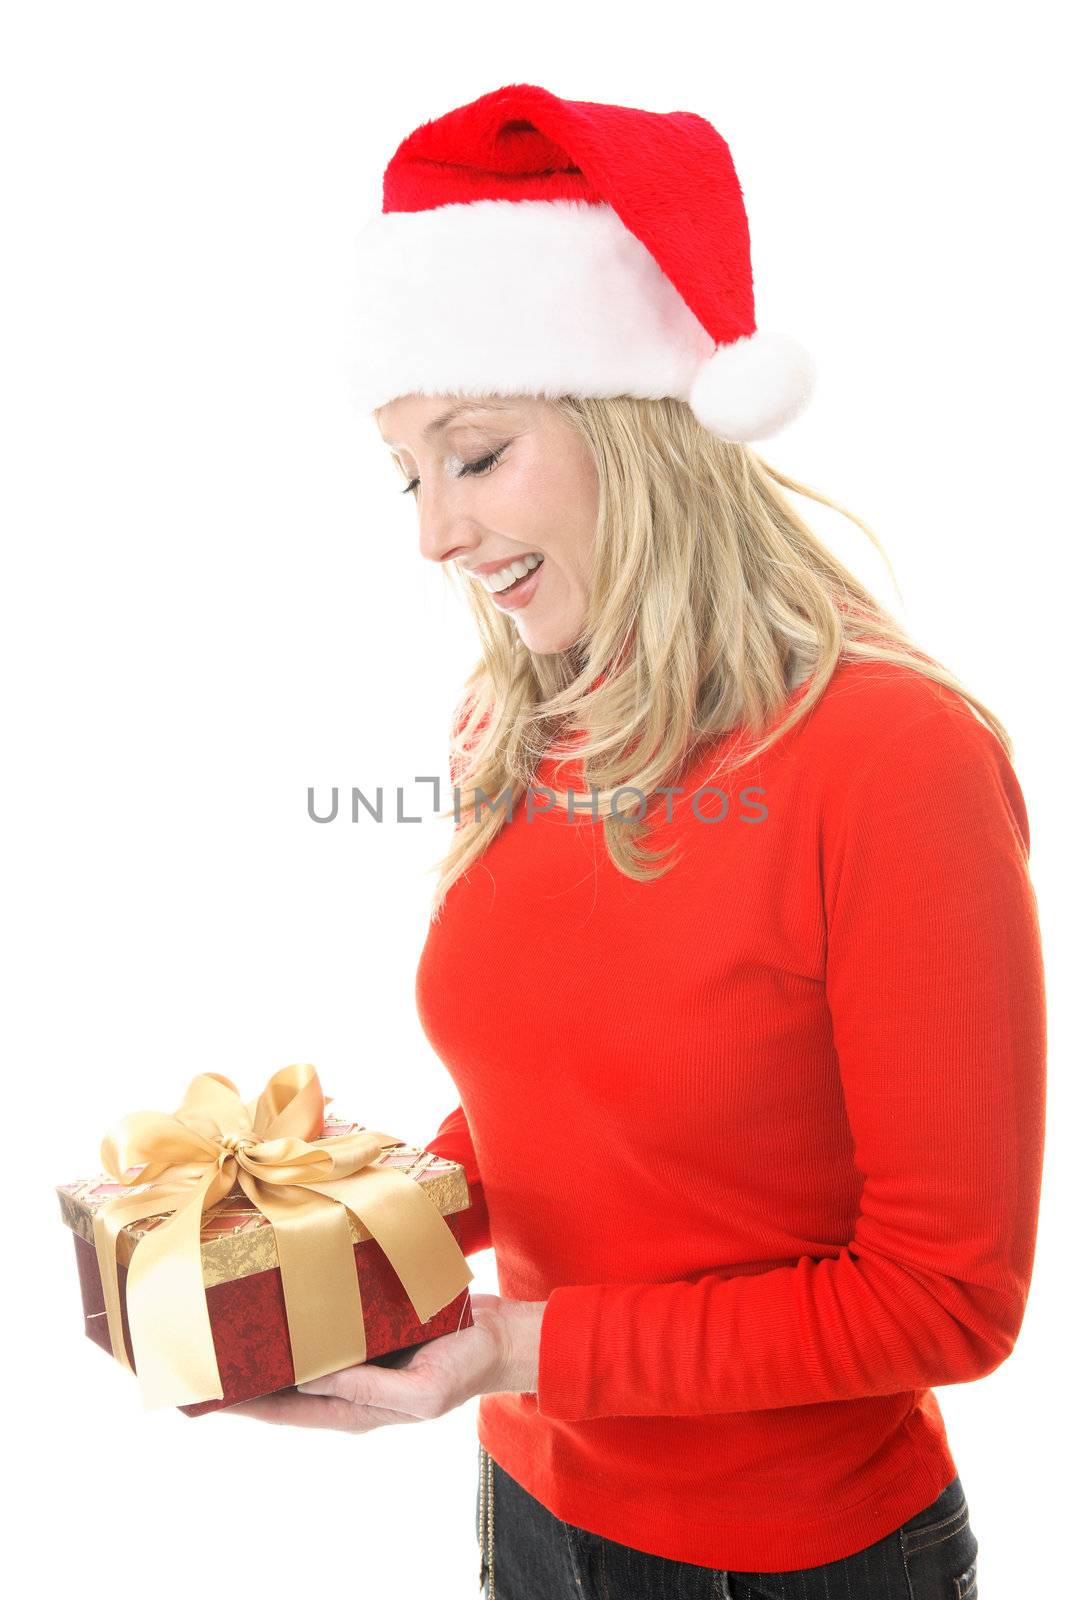 A smiling woman receiving a Christmas gift.   She is looking down and smiling in appreciation.